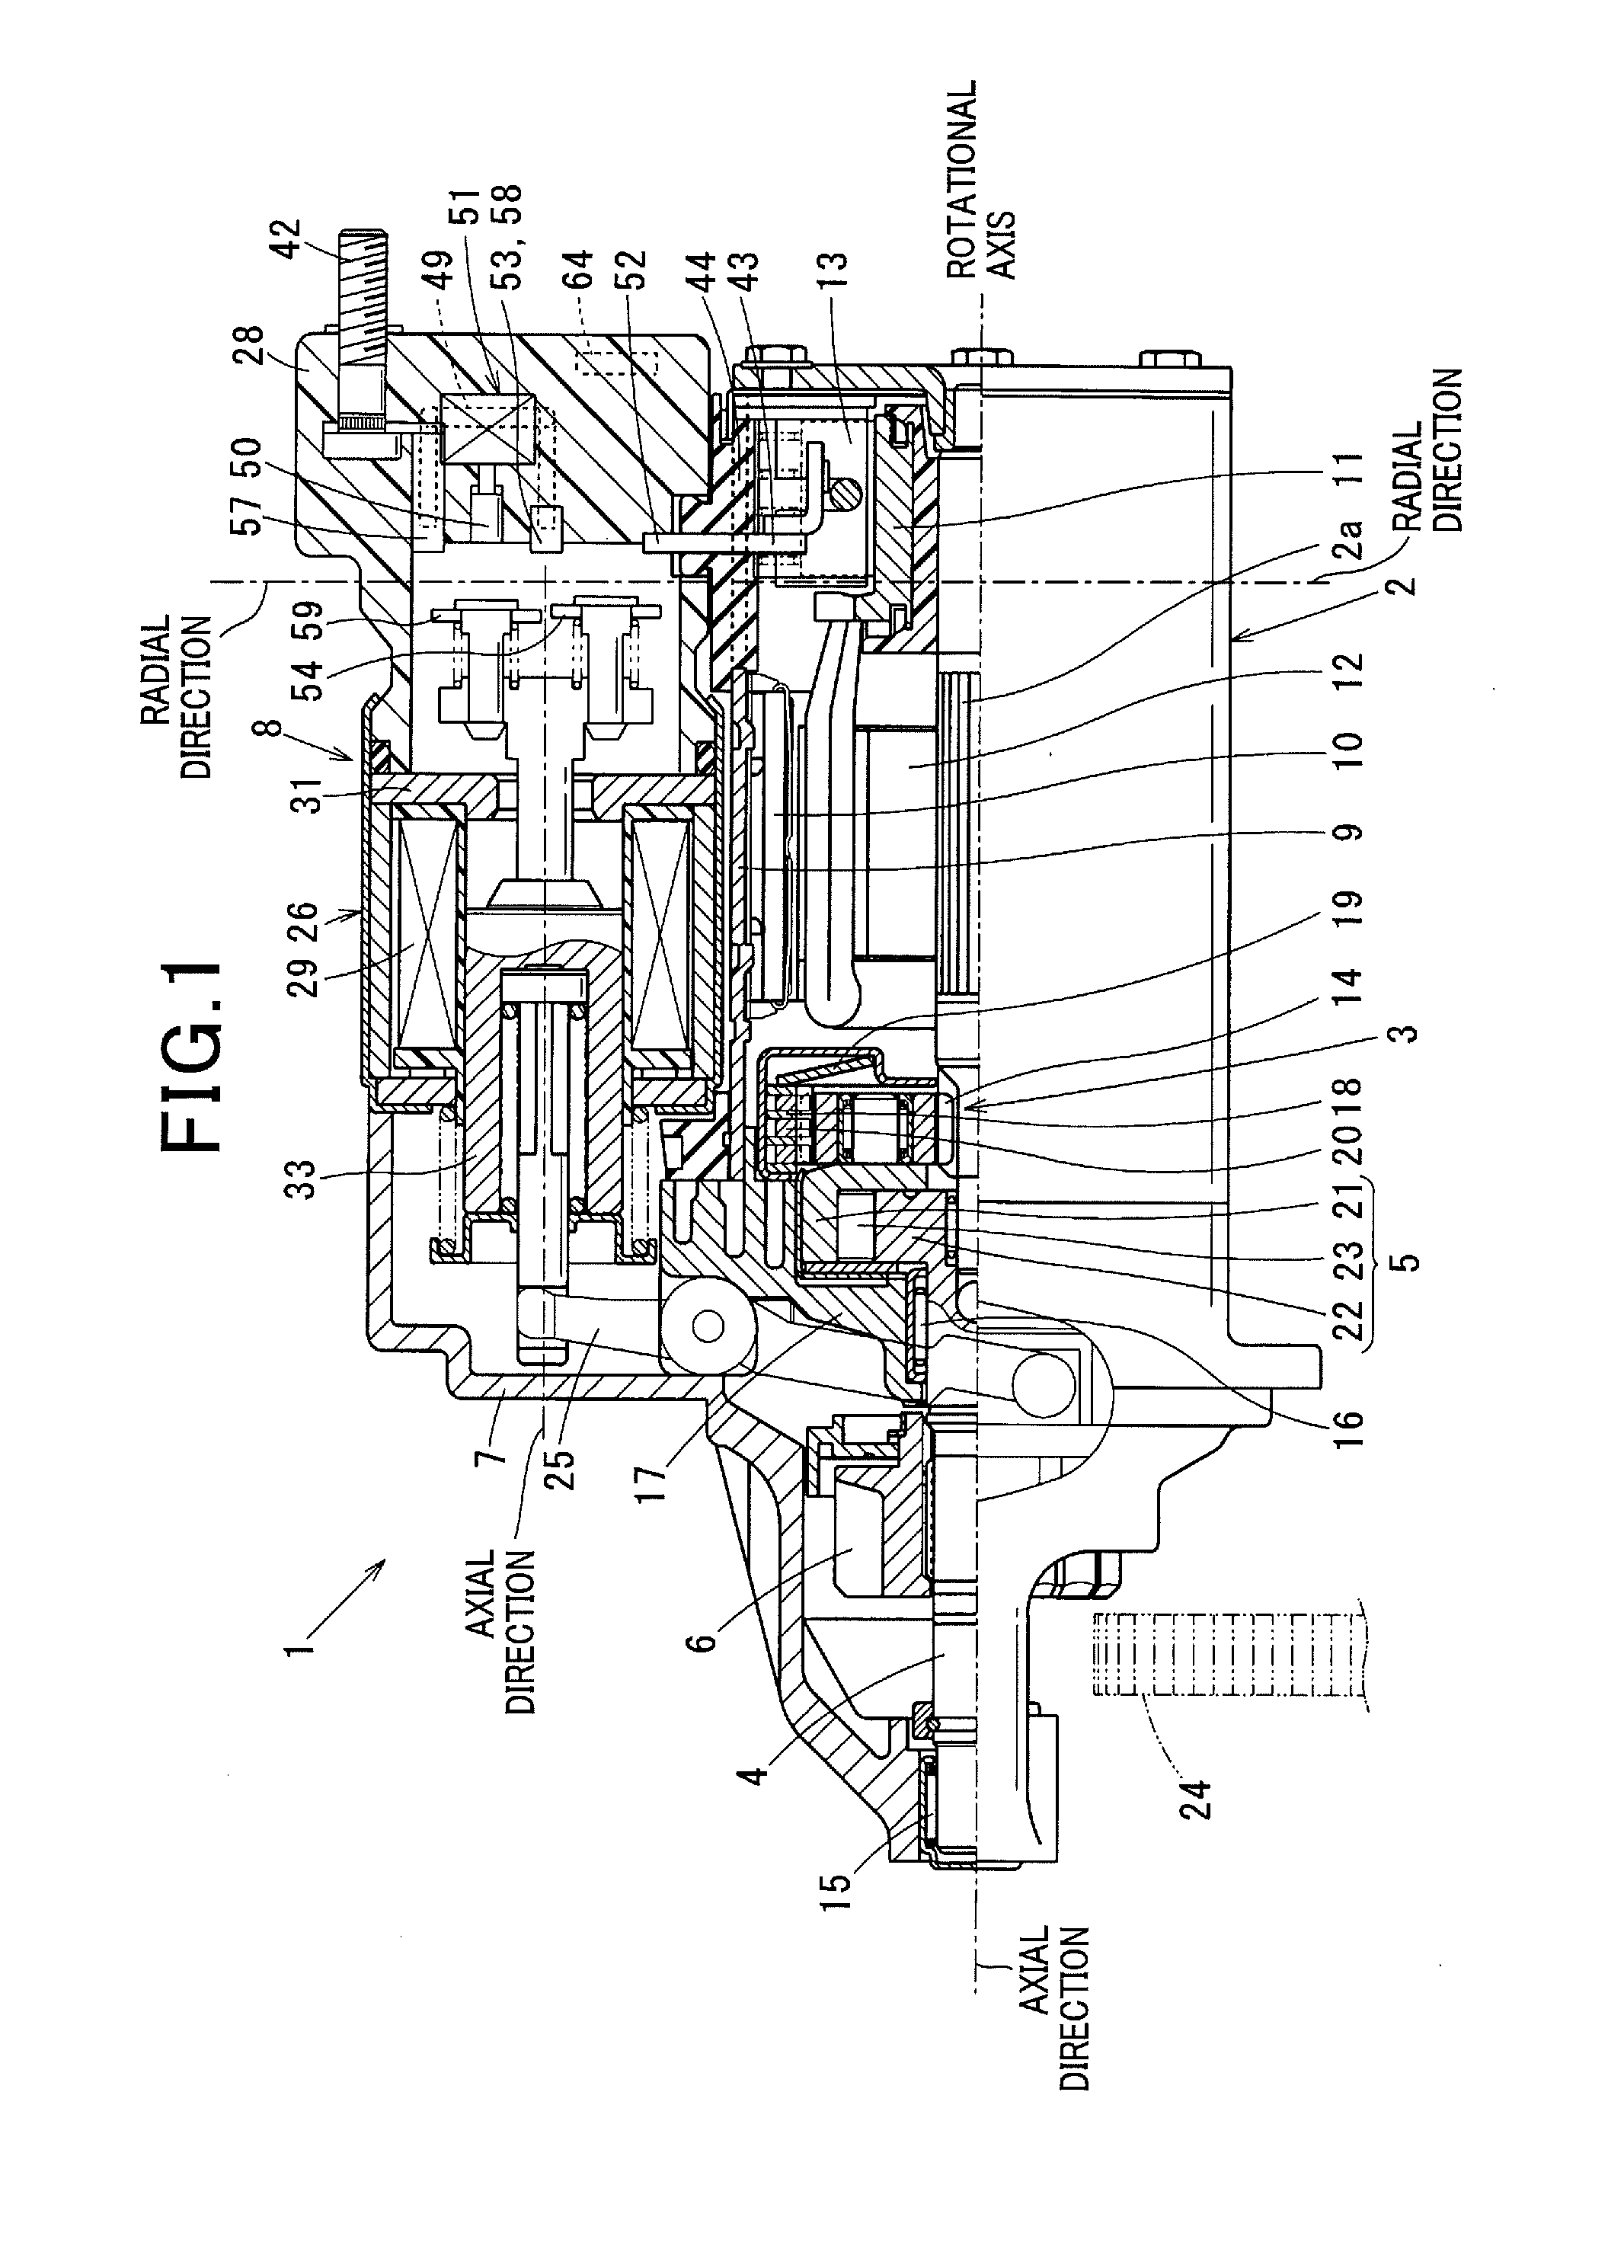 Starter provided with electromagnetic solenoid integrating rush current suppression function